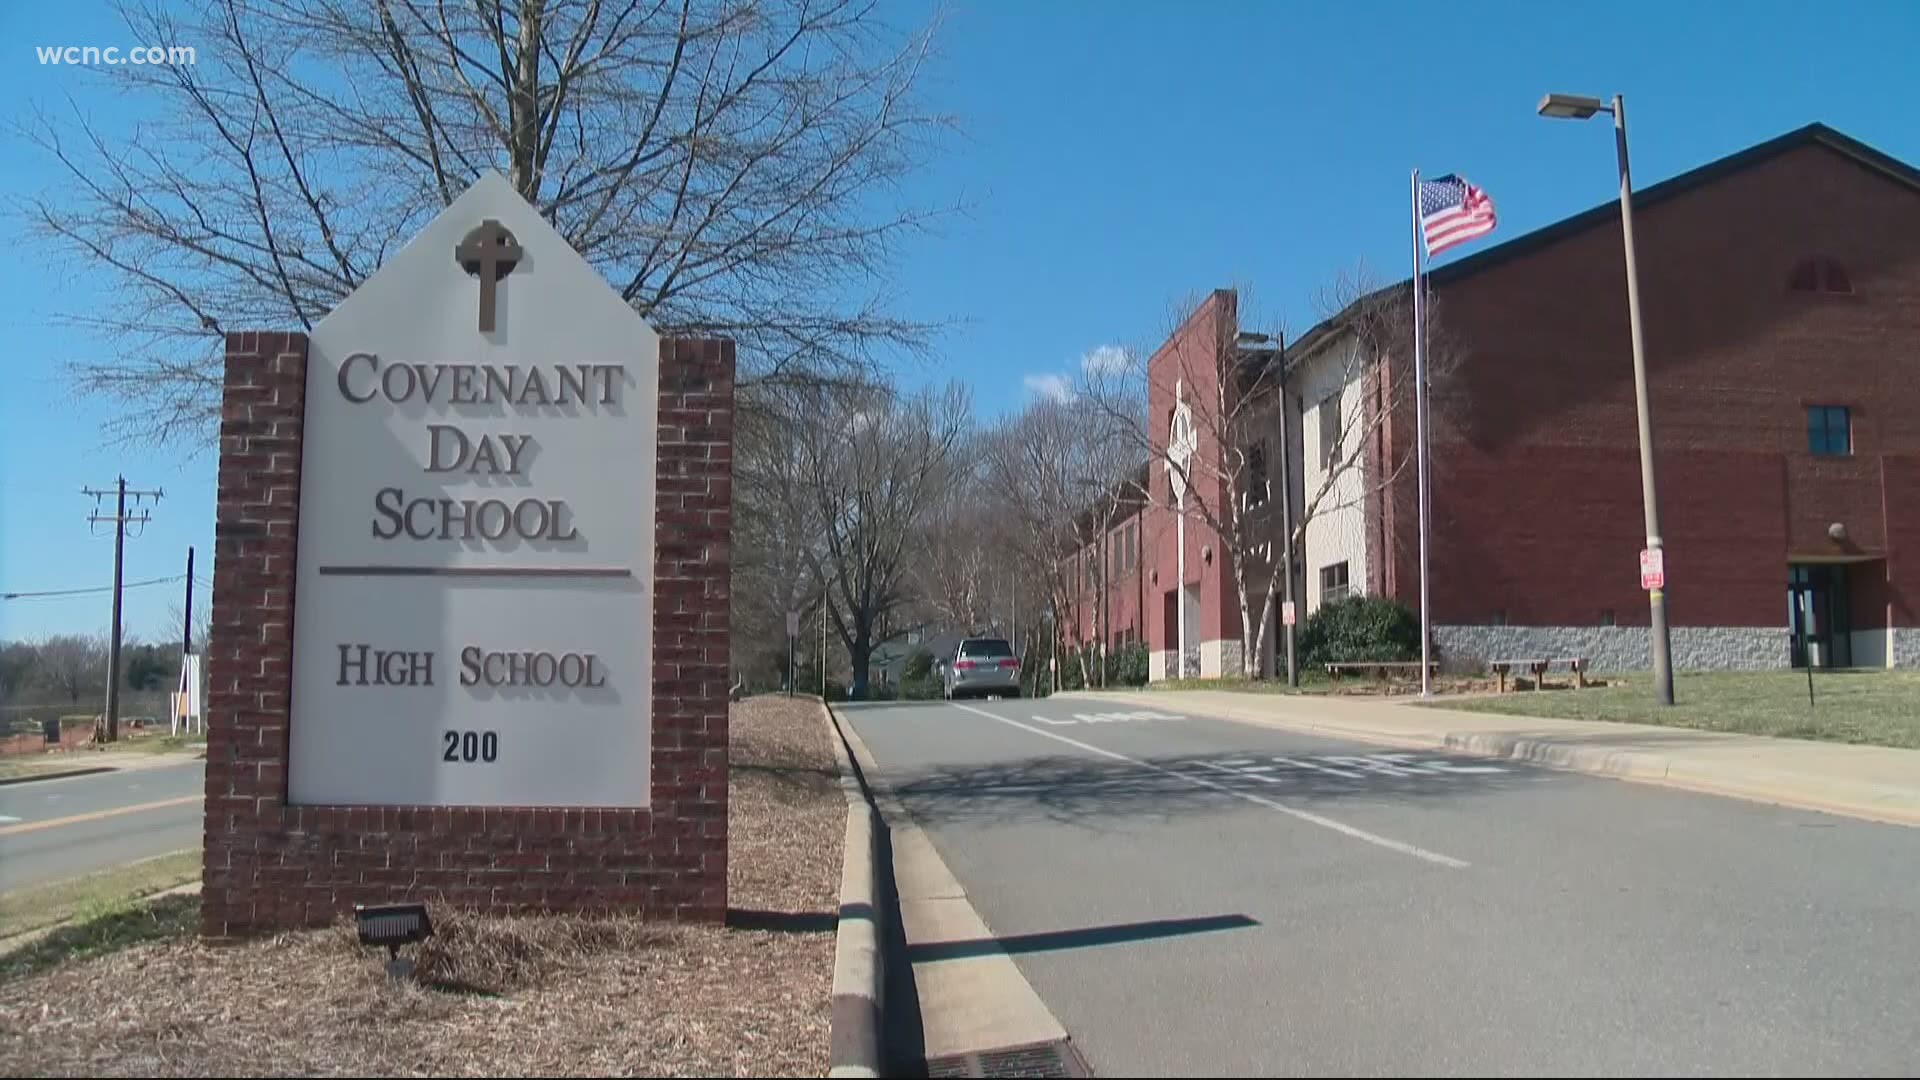 Mecklenburg County Public Health Director Gibbie Harris says 6 positive were reported at Covenant Day School, a private Christian School, located in Matthews.